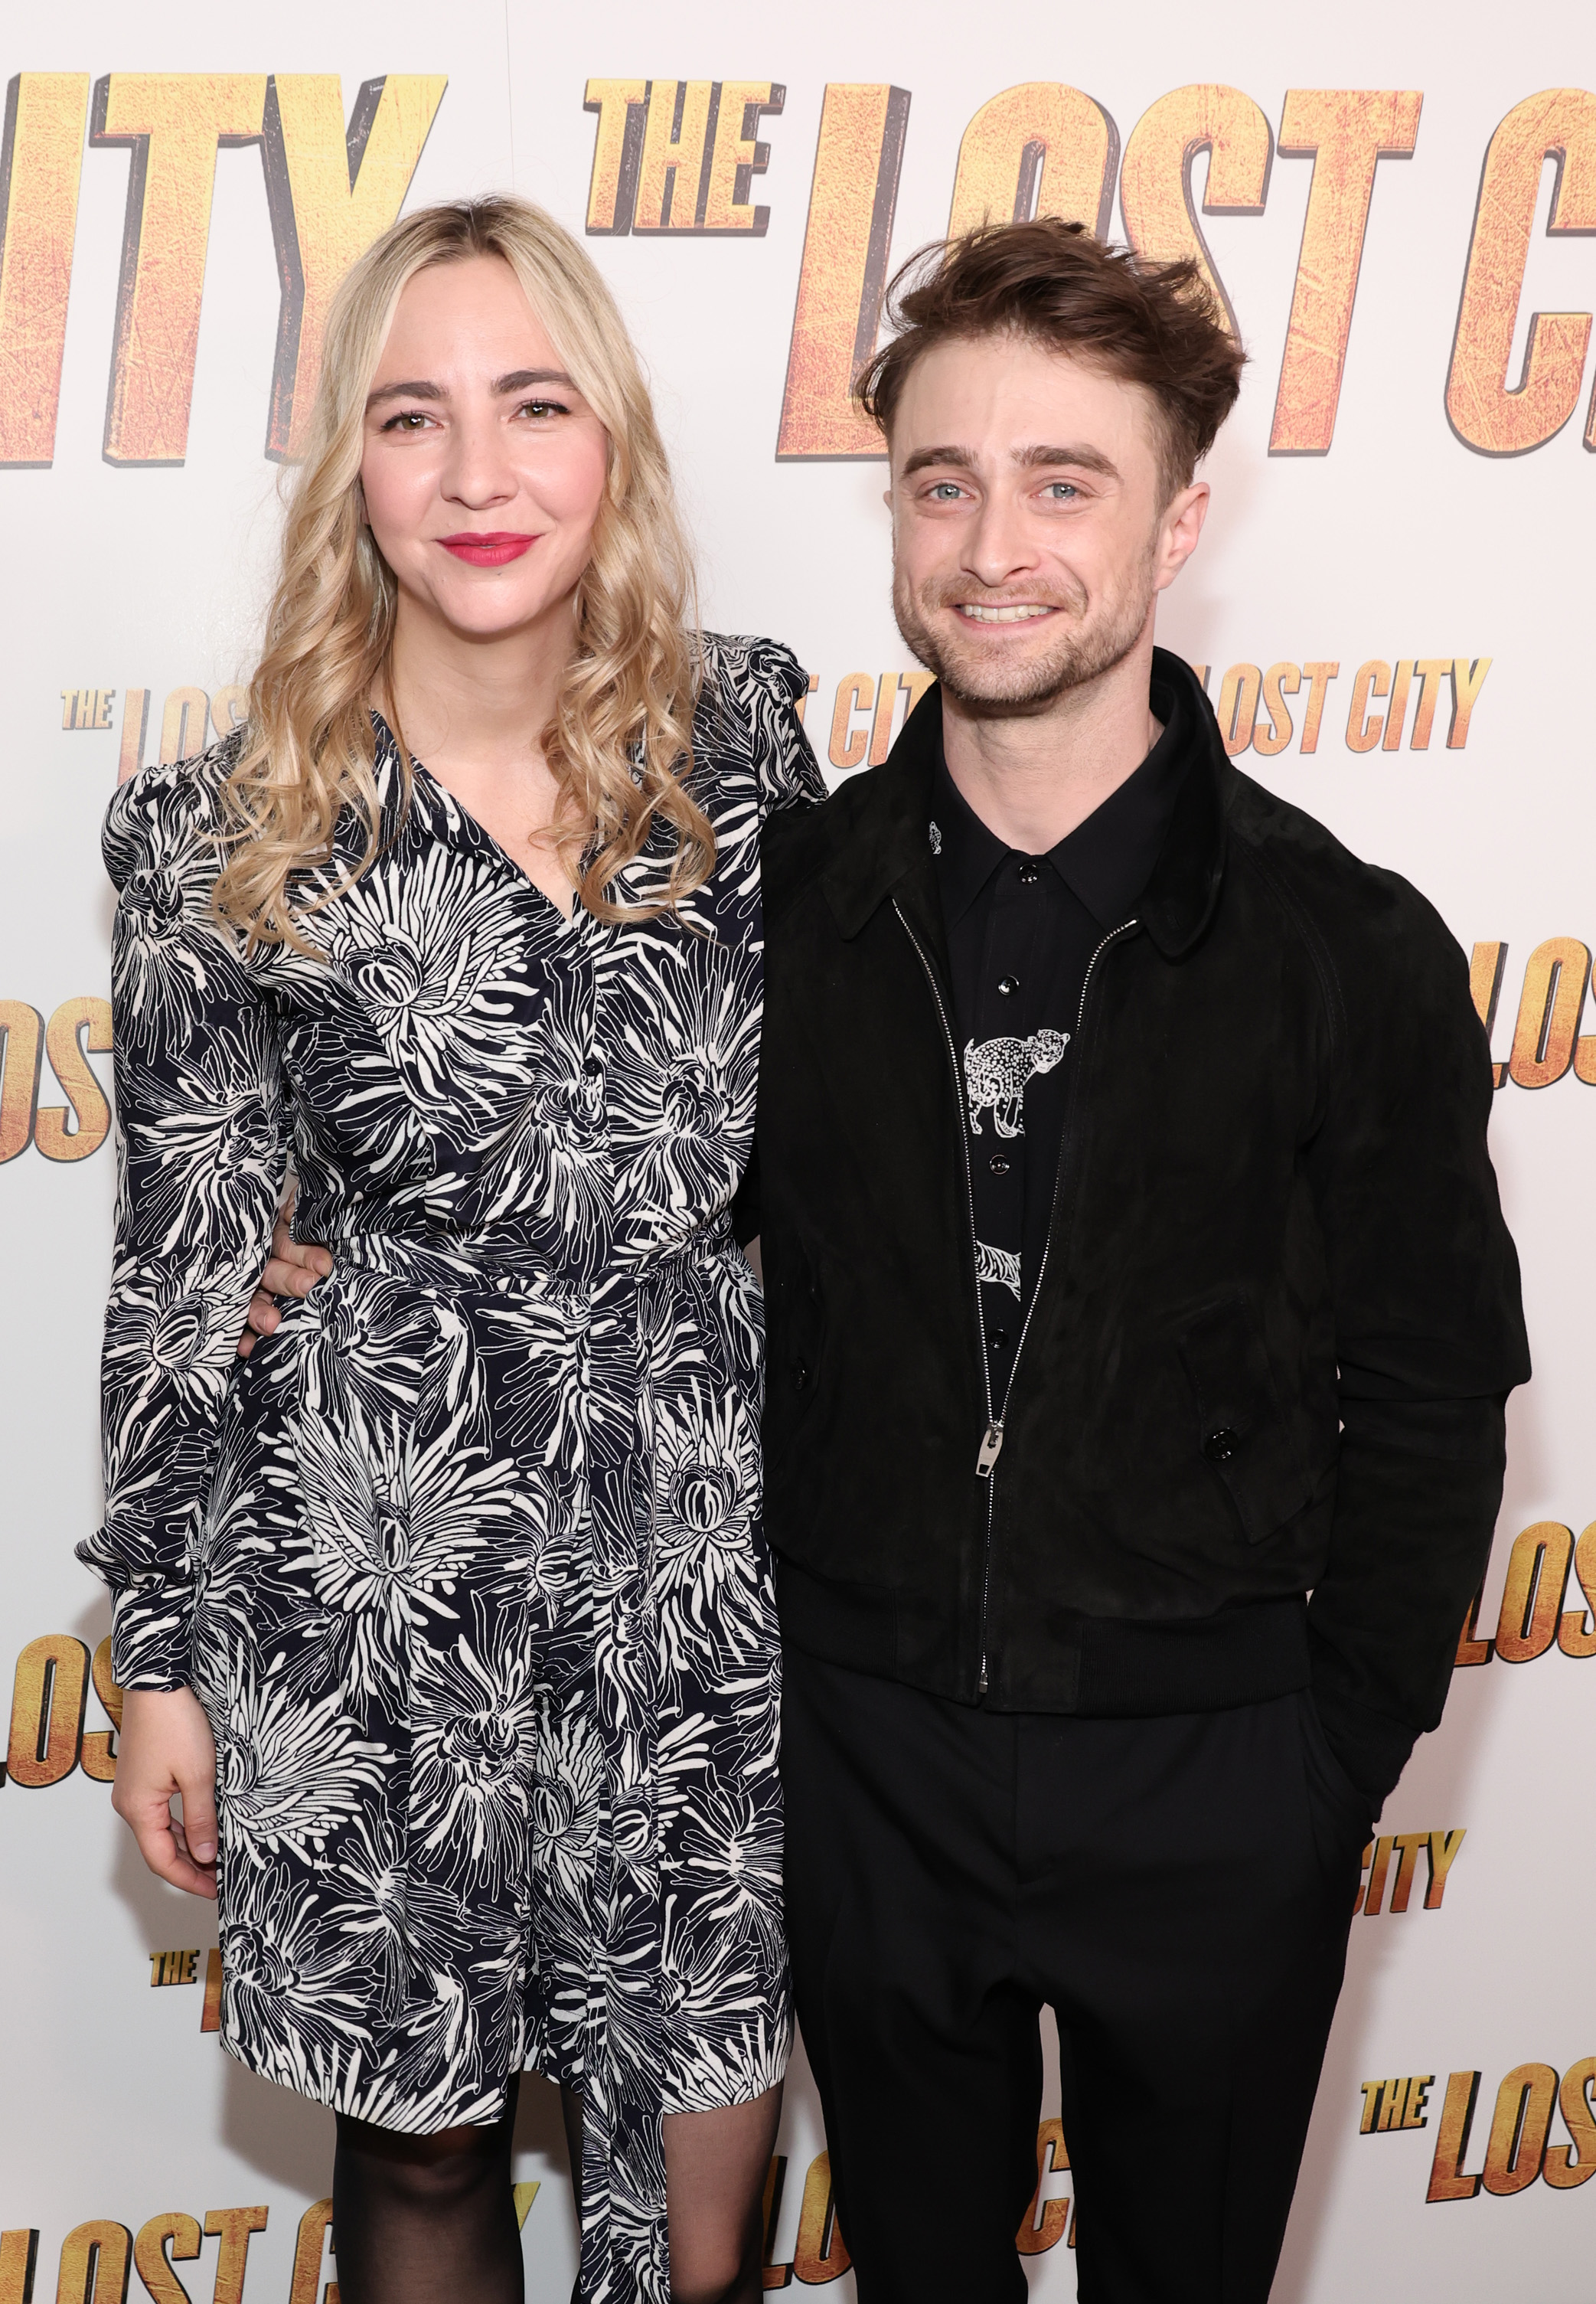 Erin Darke and Daniel Radcliffe at a screening of "The Lost City" in New York City on March 14, 2022 | Source: Getty Images